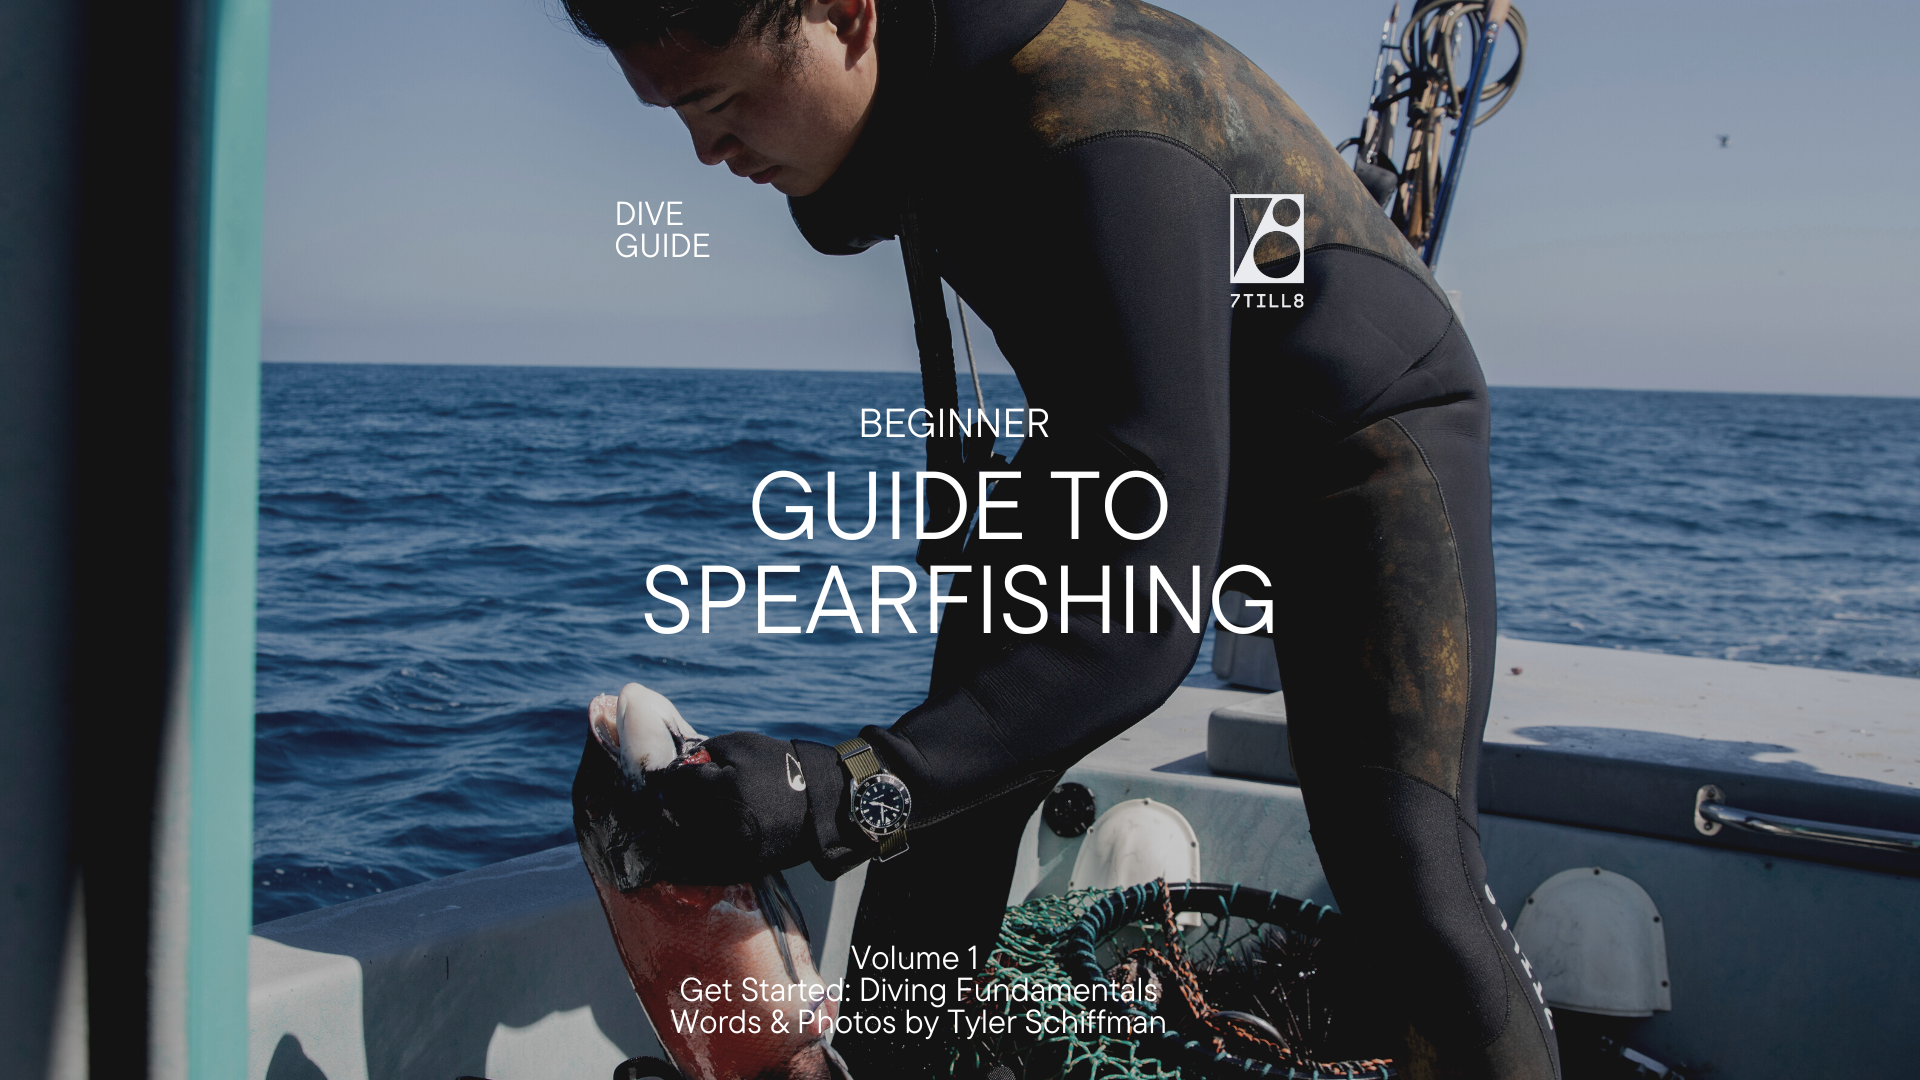 7TILL8's Beginner's Guide to Spearfishing - Vol 1 - Get Started With Fundamentals